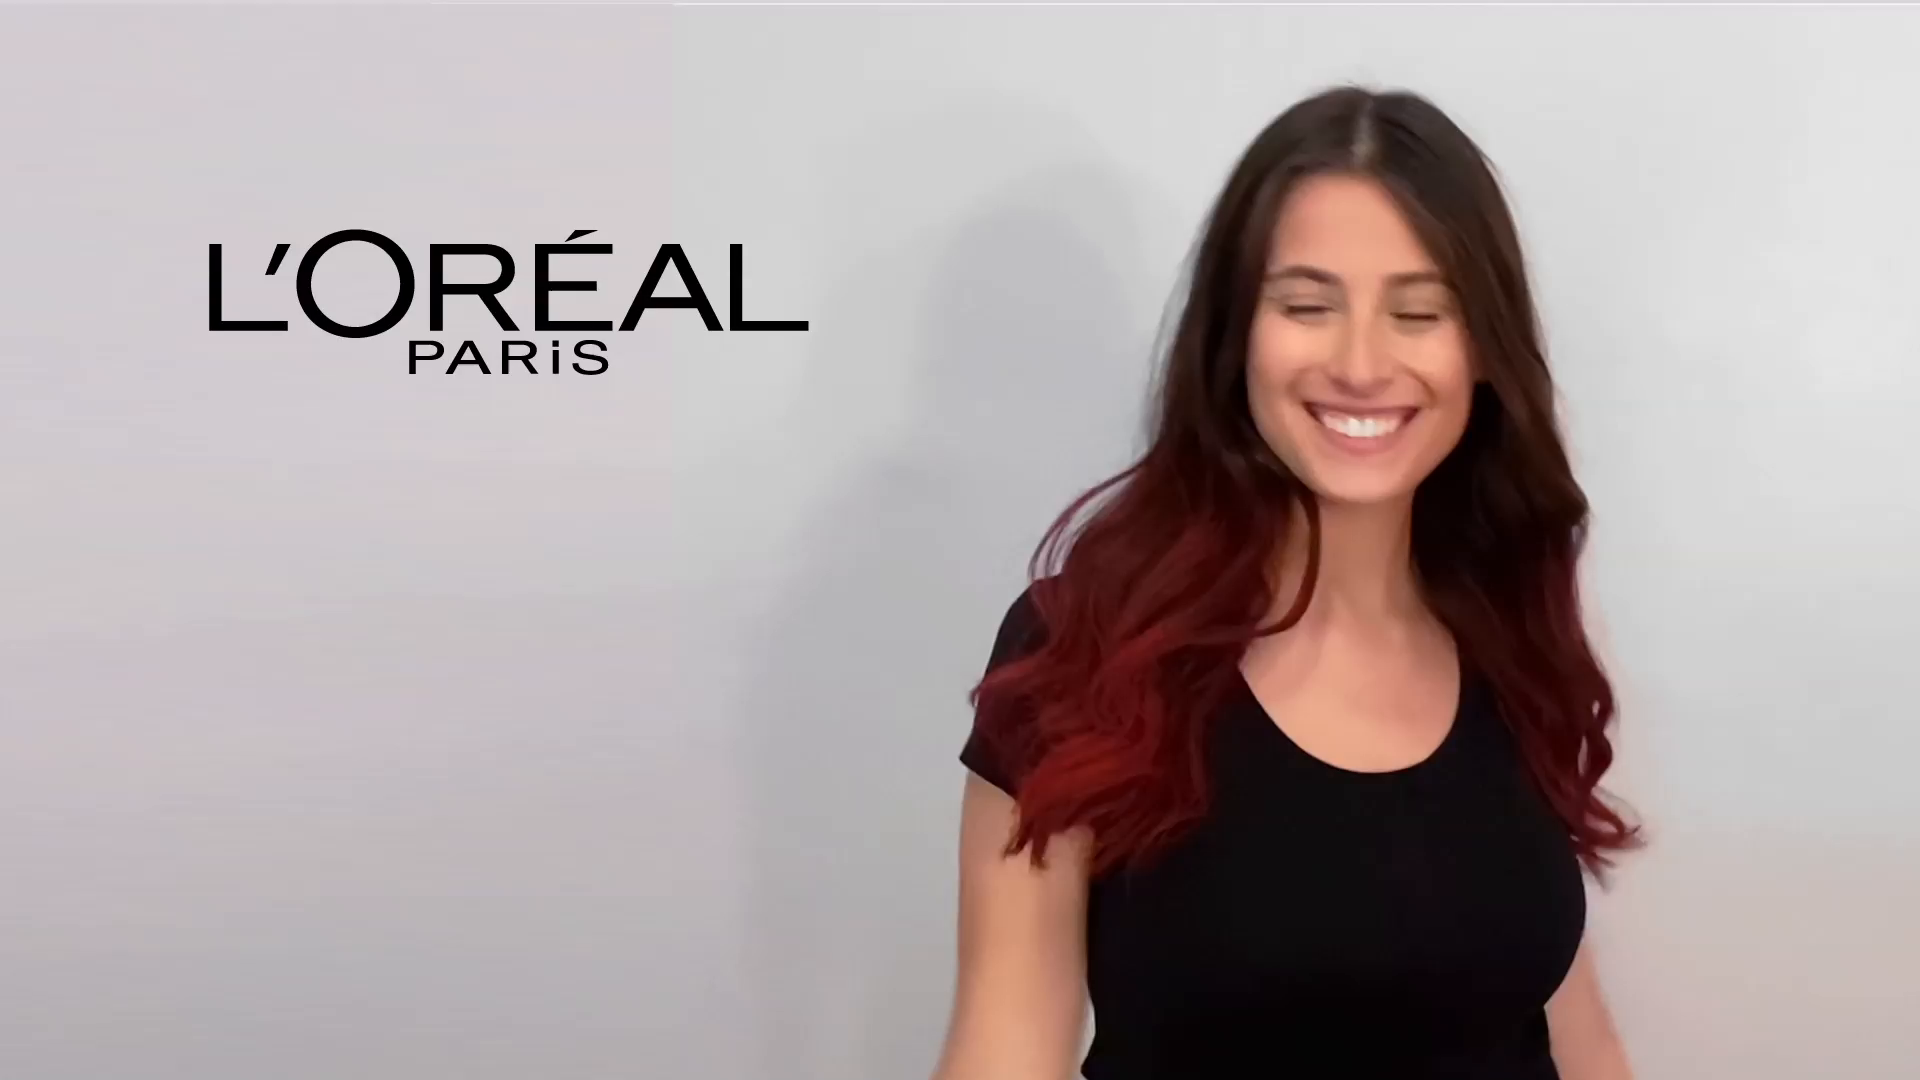 forfriskende Stræde præst L'Oréal Paris USA on Twitter: "Spray &amp; play with color by #Colorista.  Get red hot hair with #Colorista 1-Day Hair Color Spray in shade #Red400.  Spray it on &amp; show off your